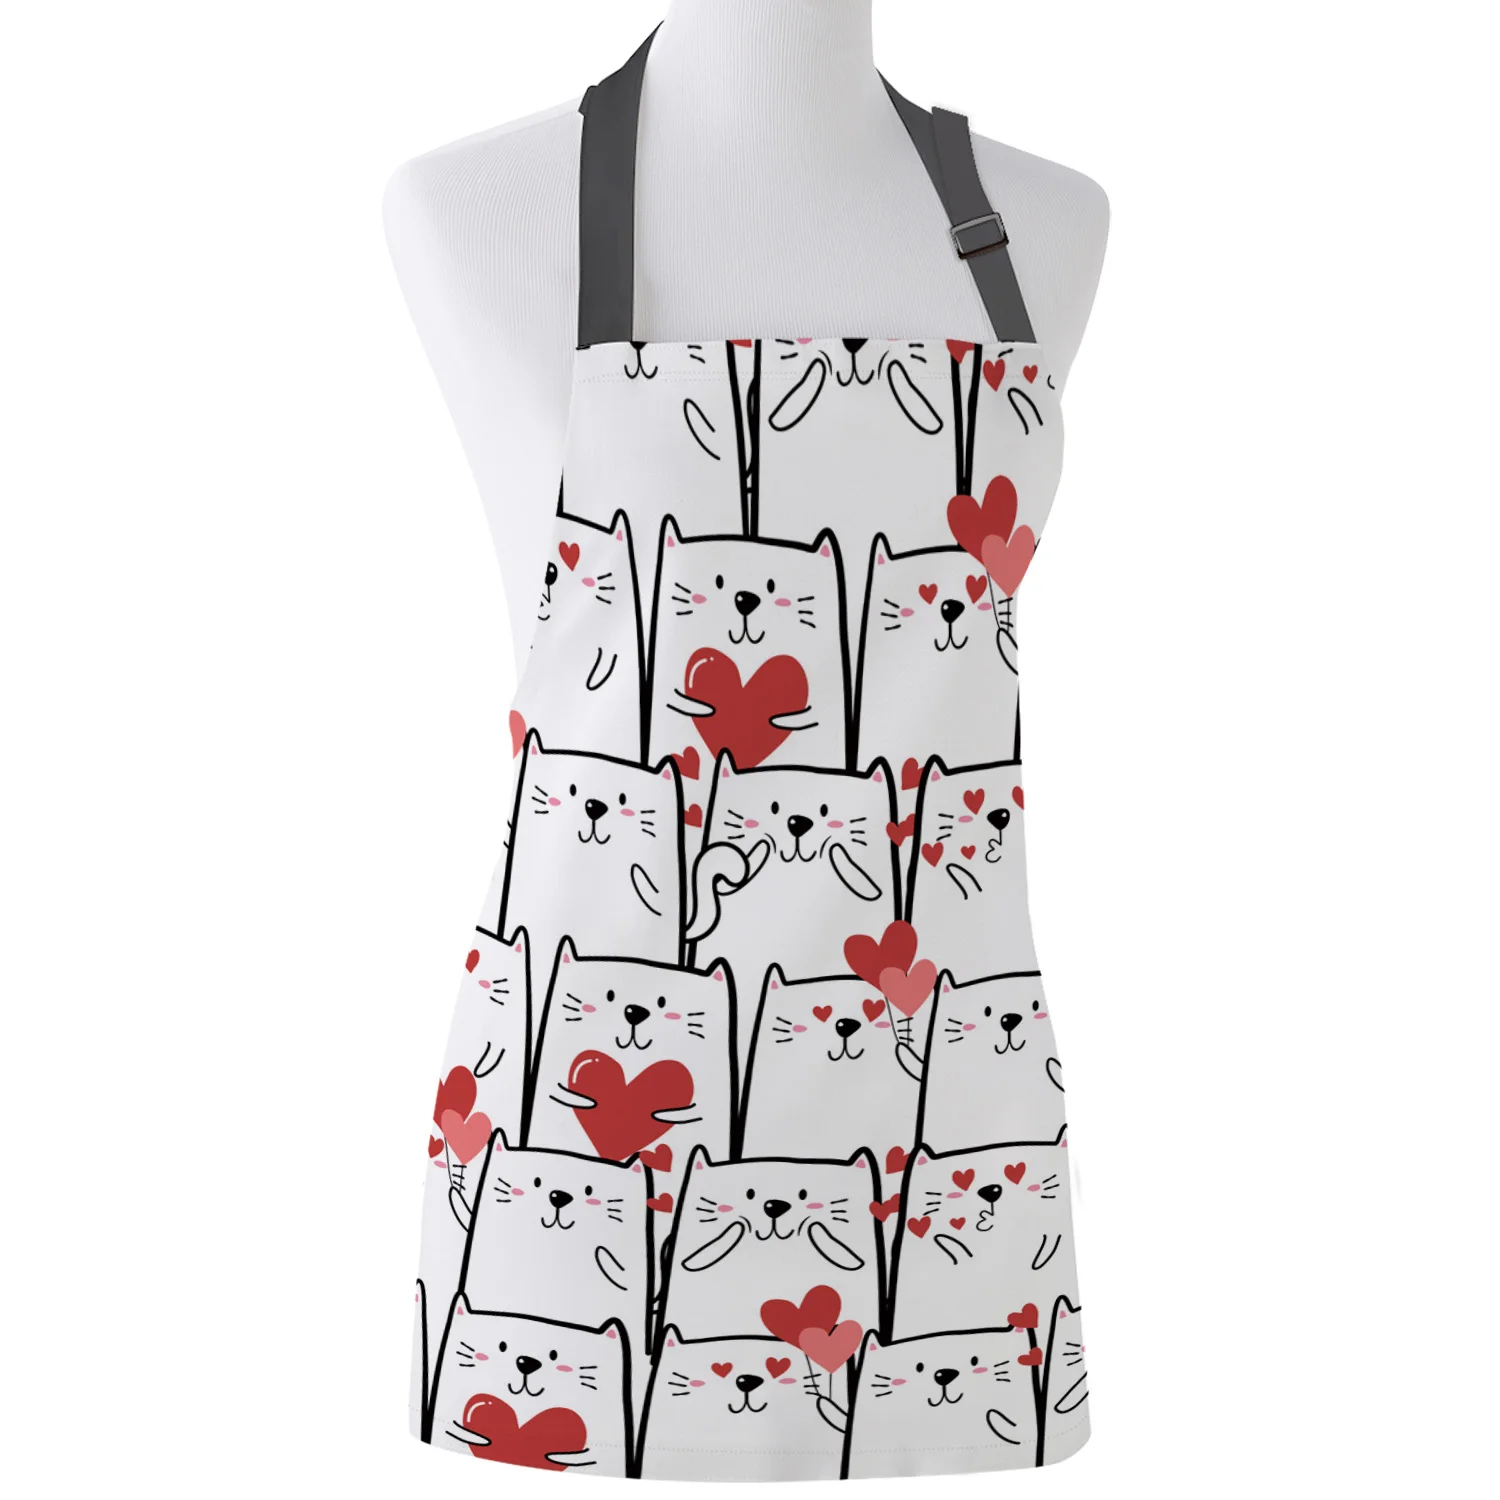 

Love Cat Apron Adult Kids Bibs Home Cooking Baking Restaurant Kichen Aprons for Woman Cleaning Apron